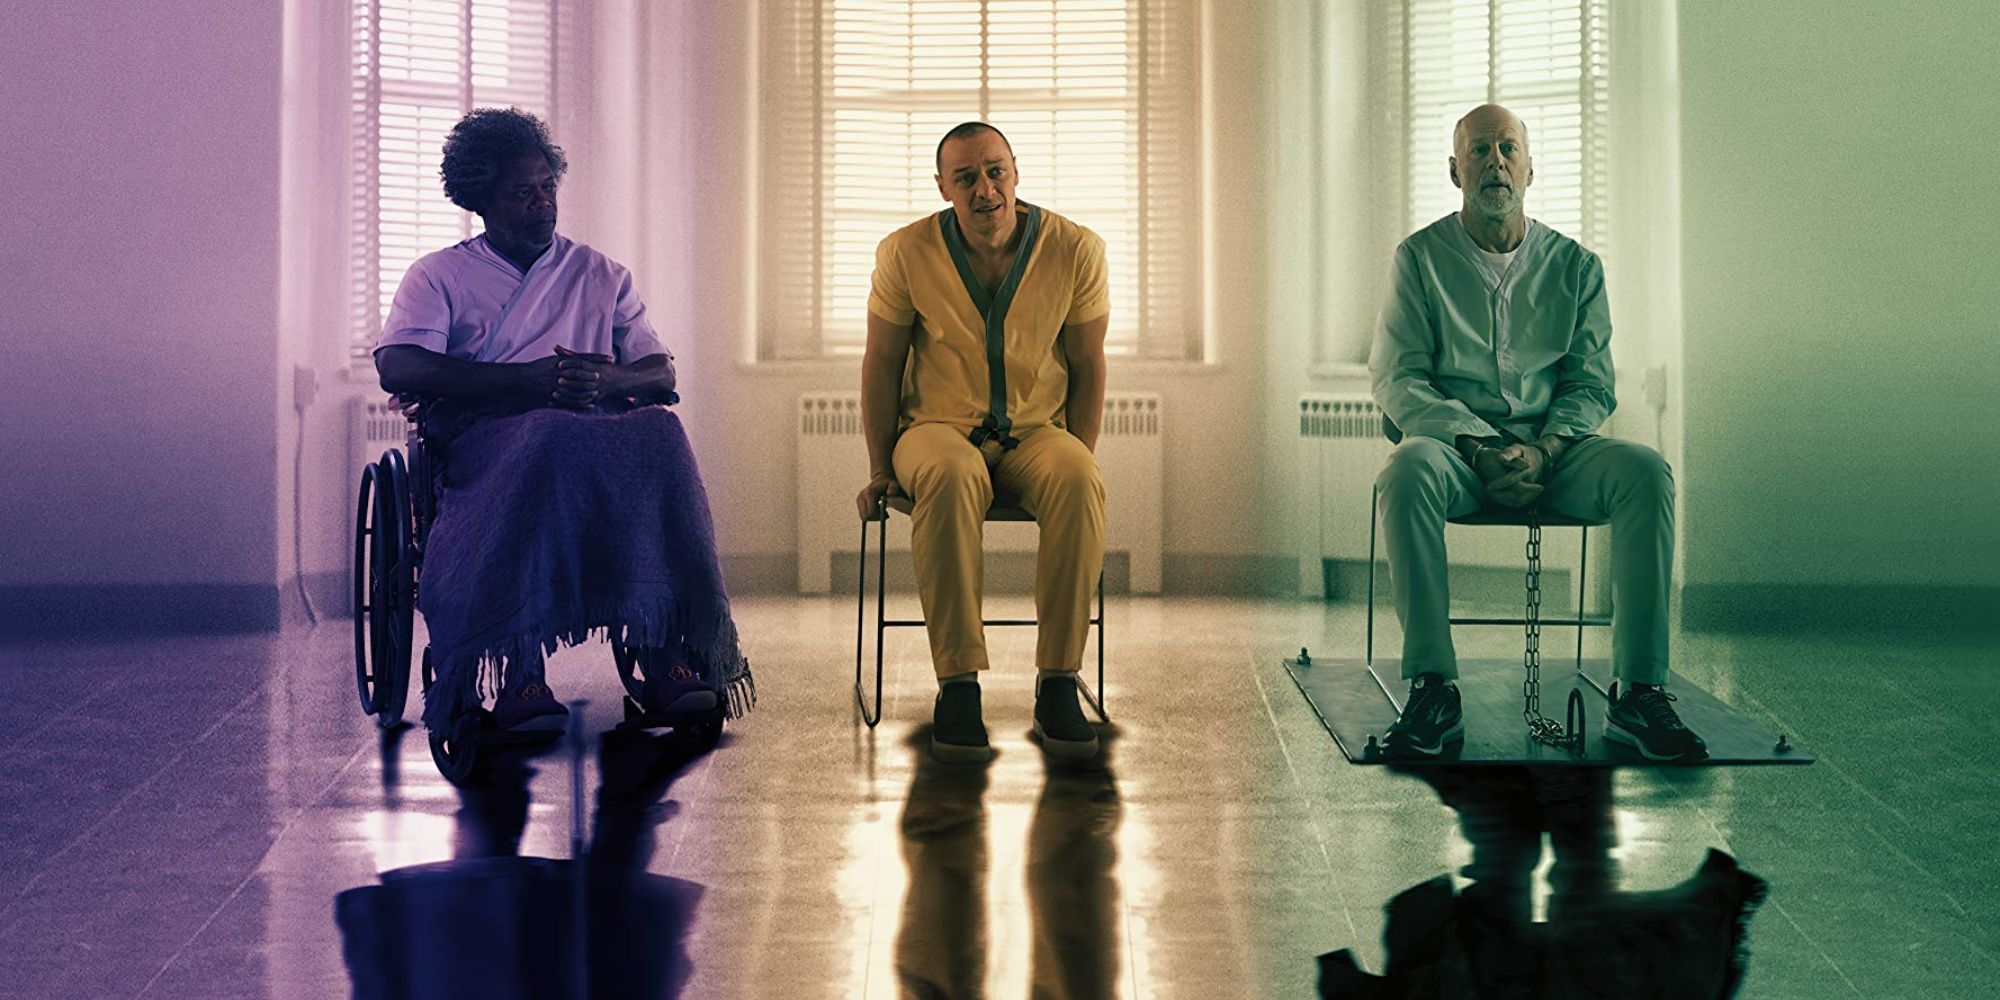 A maniacal supervillain, a schizophrenic criminal, and an unnaturally strong hero sit in an empty room in a  mental institute. 